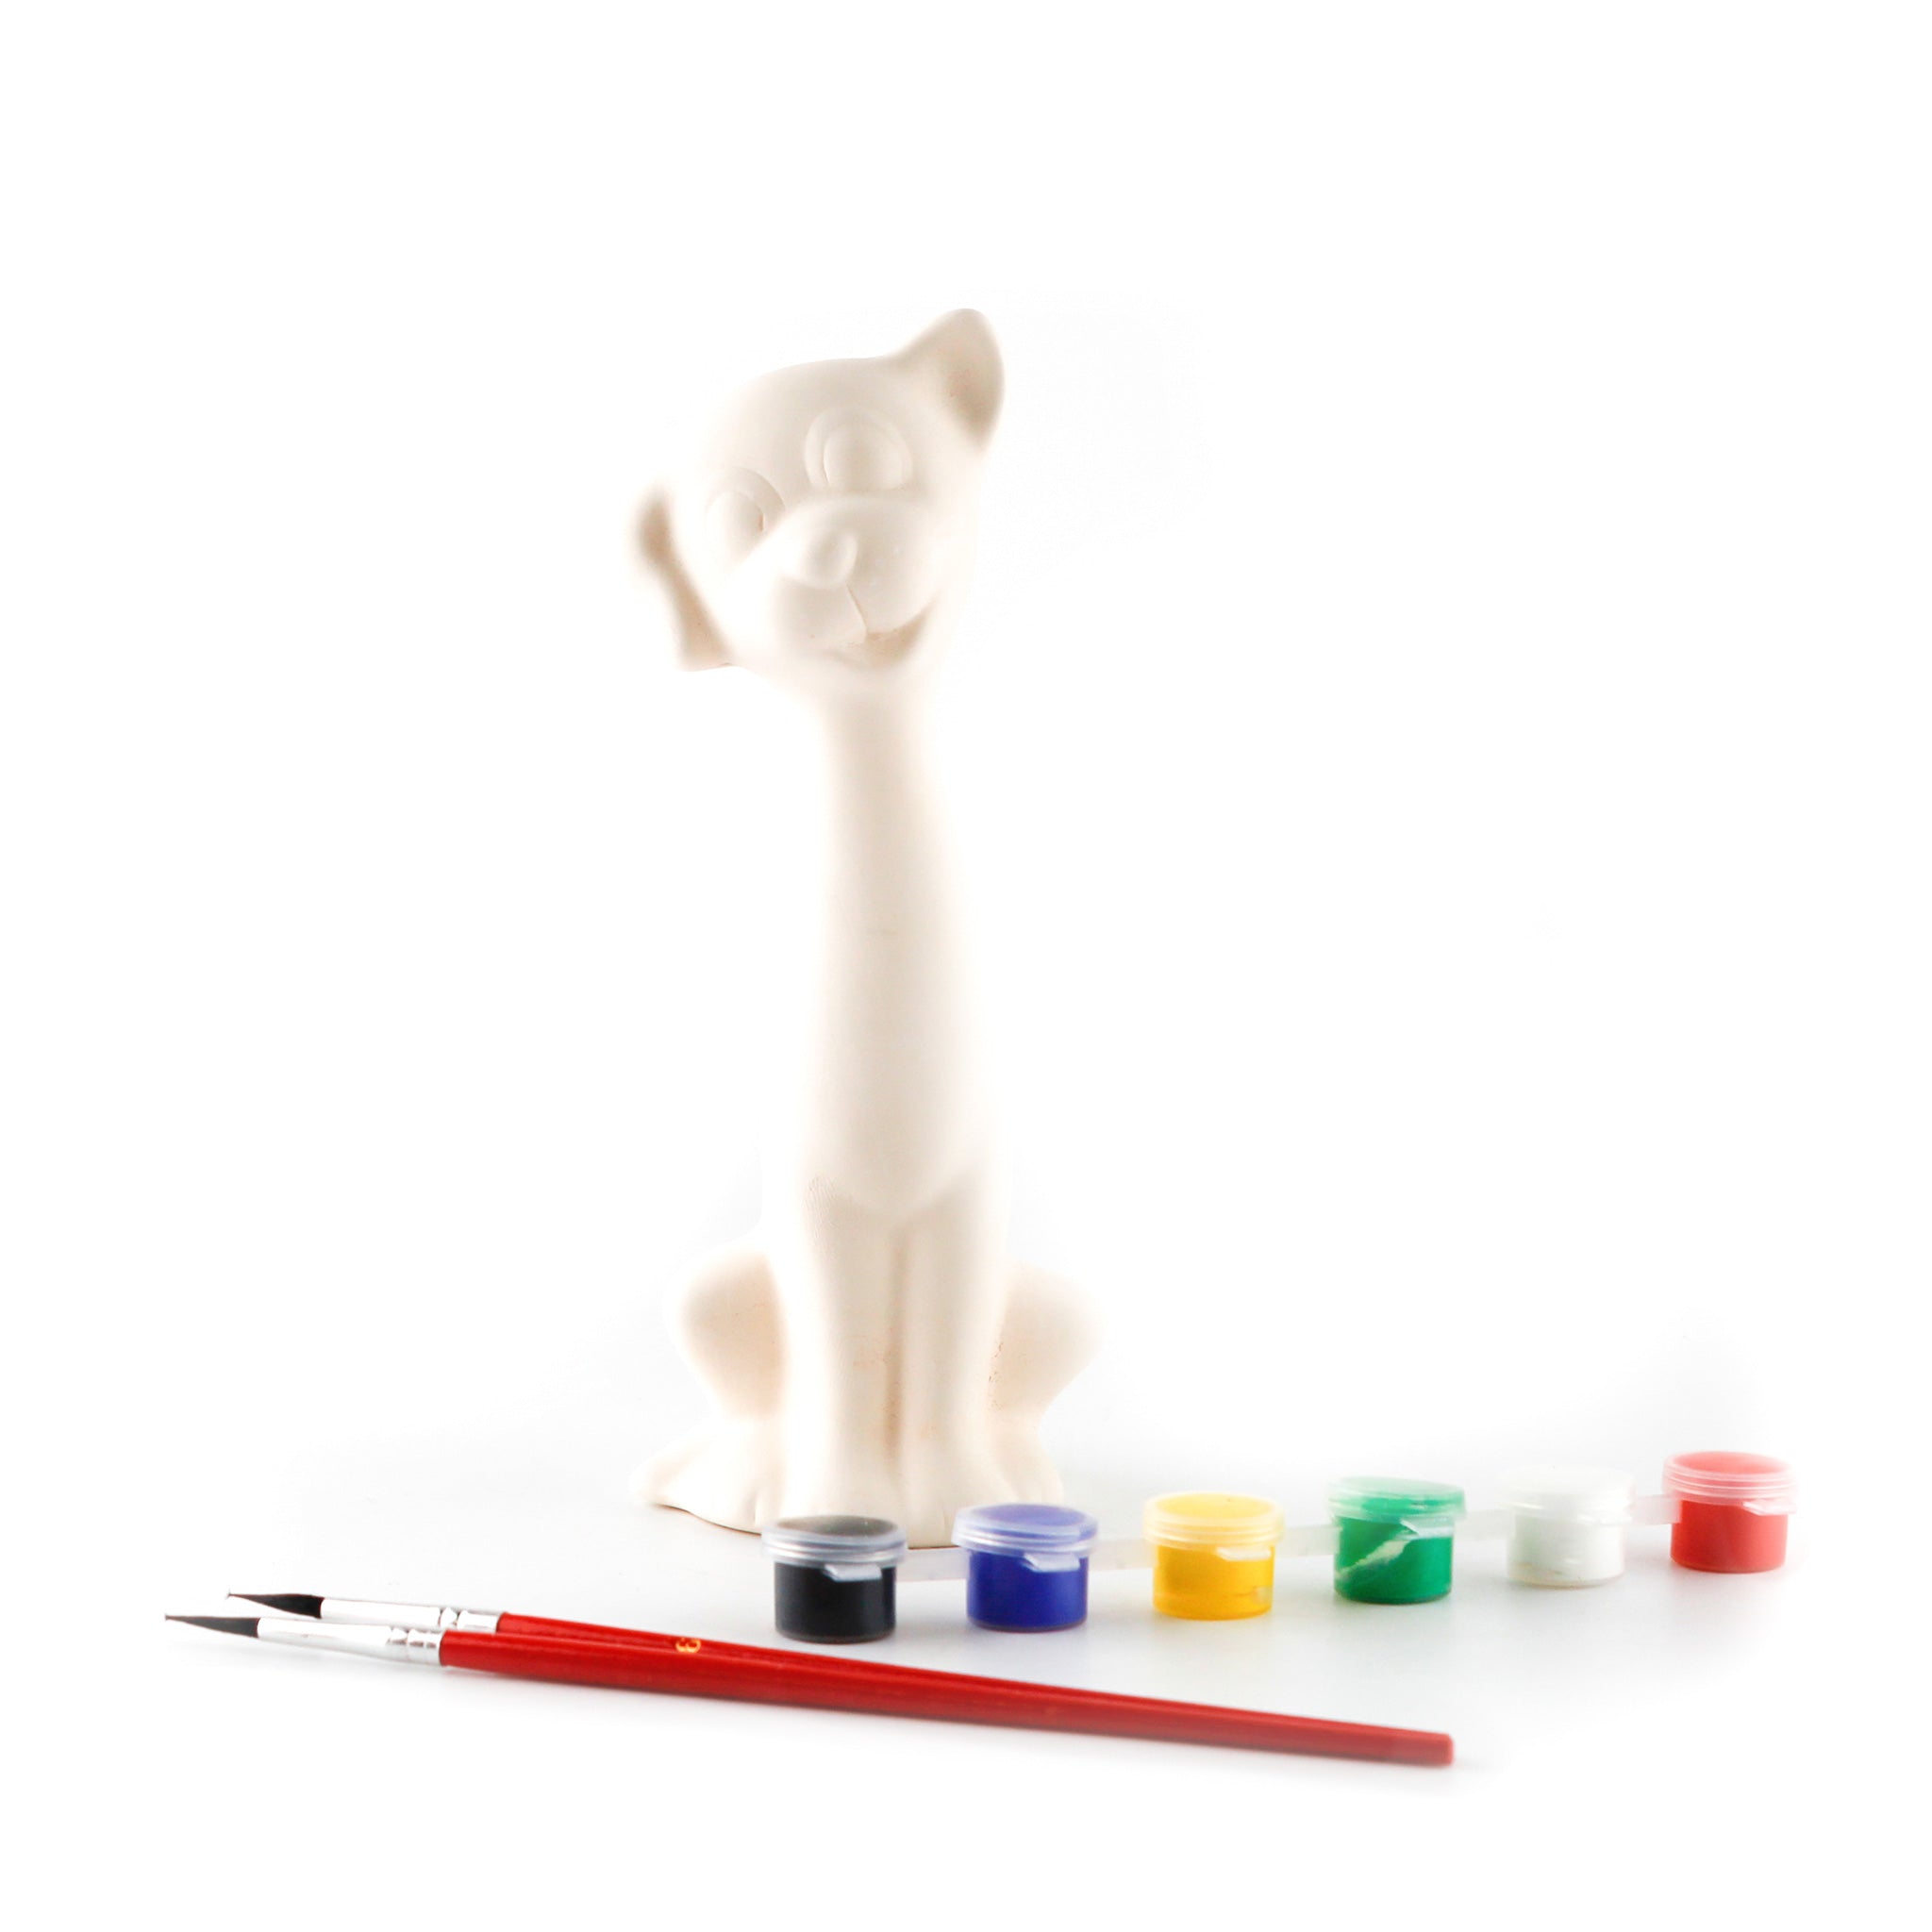 White ceramic dog with paints and brushes